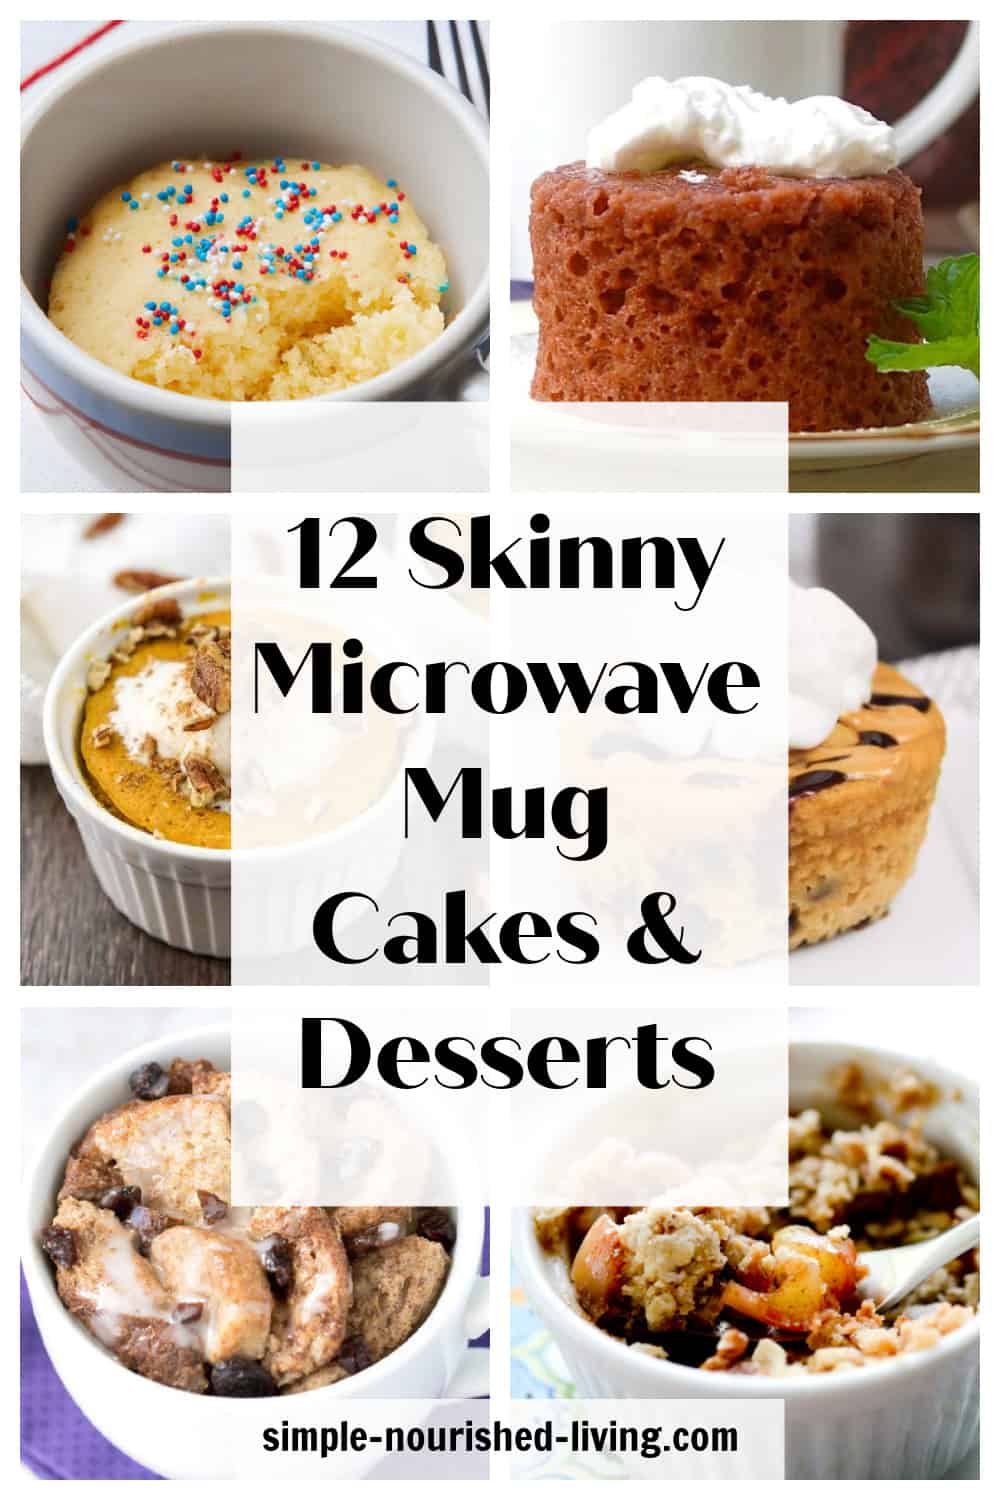 Collage showing six different microwave mug cakes and desserts.